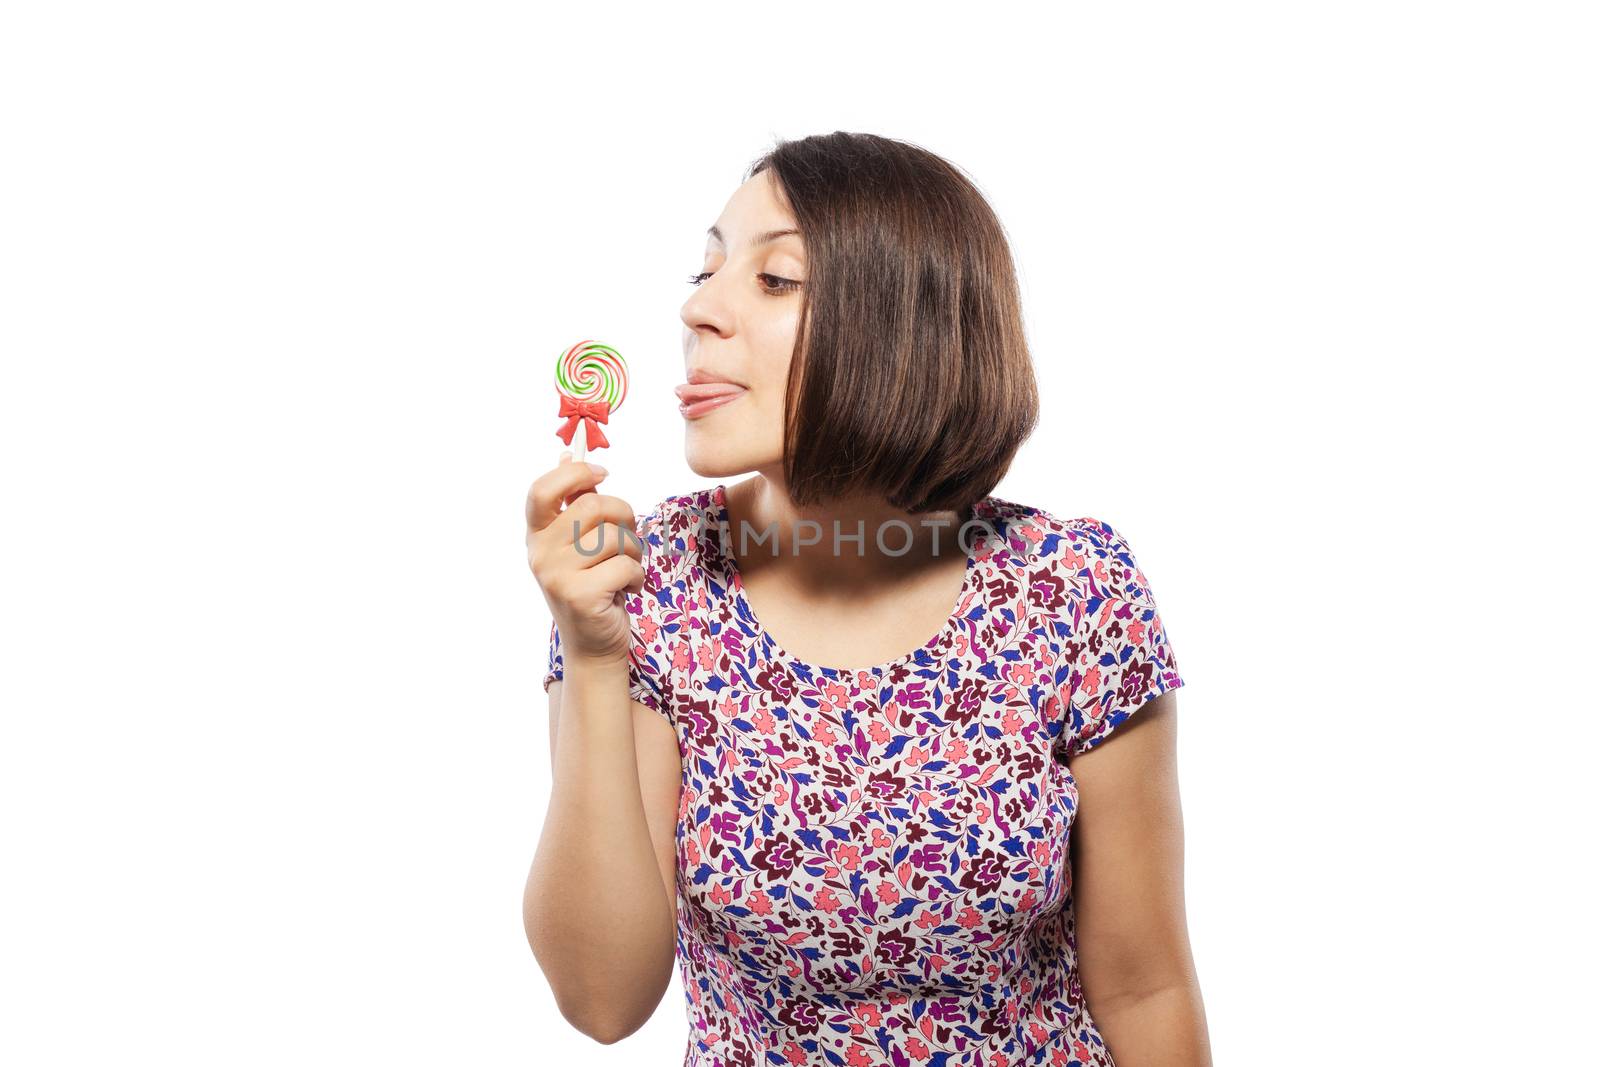 happy girl in pink dress trying to lick a spiral lollipop